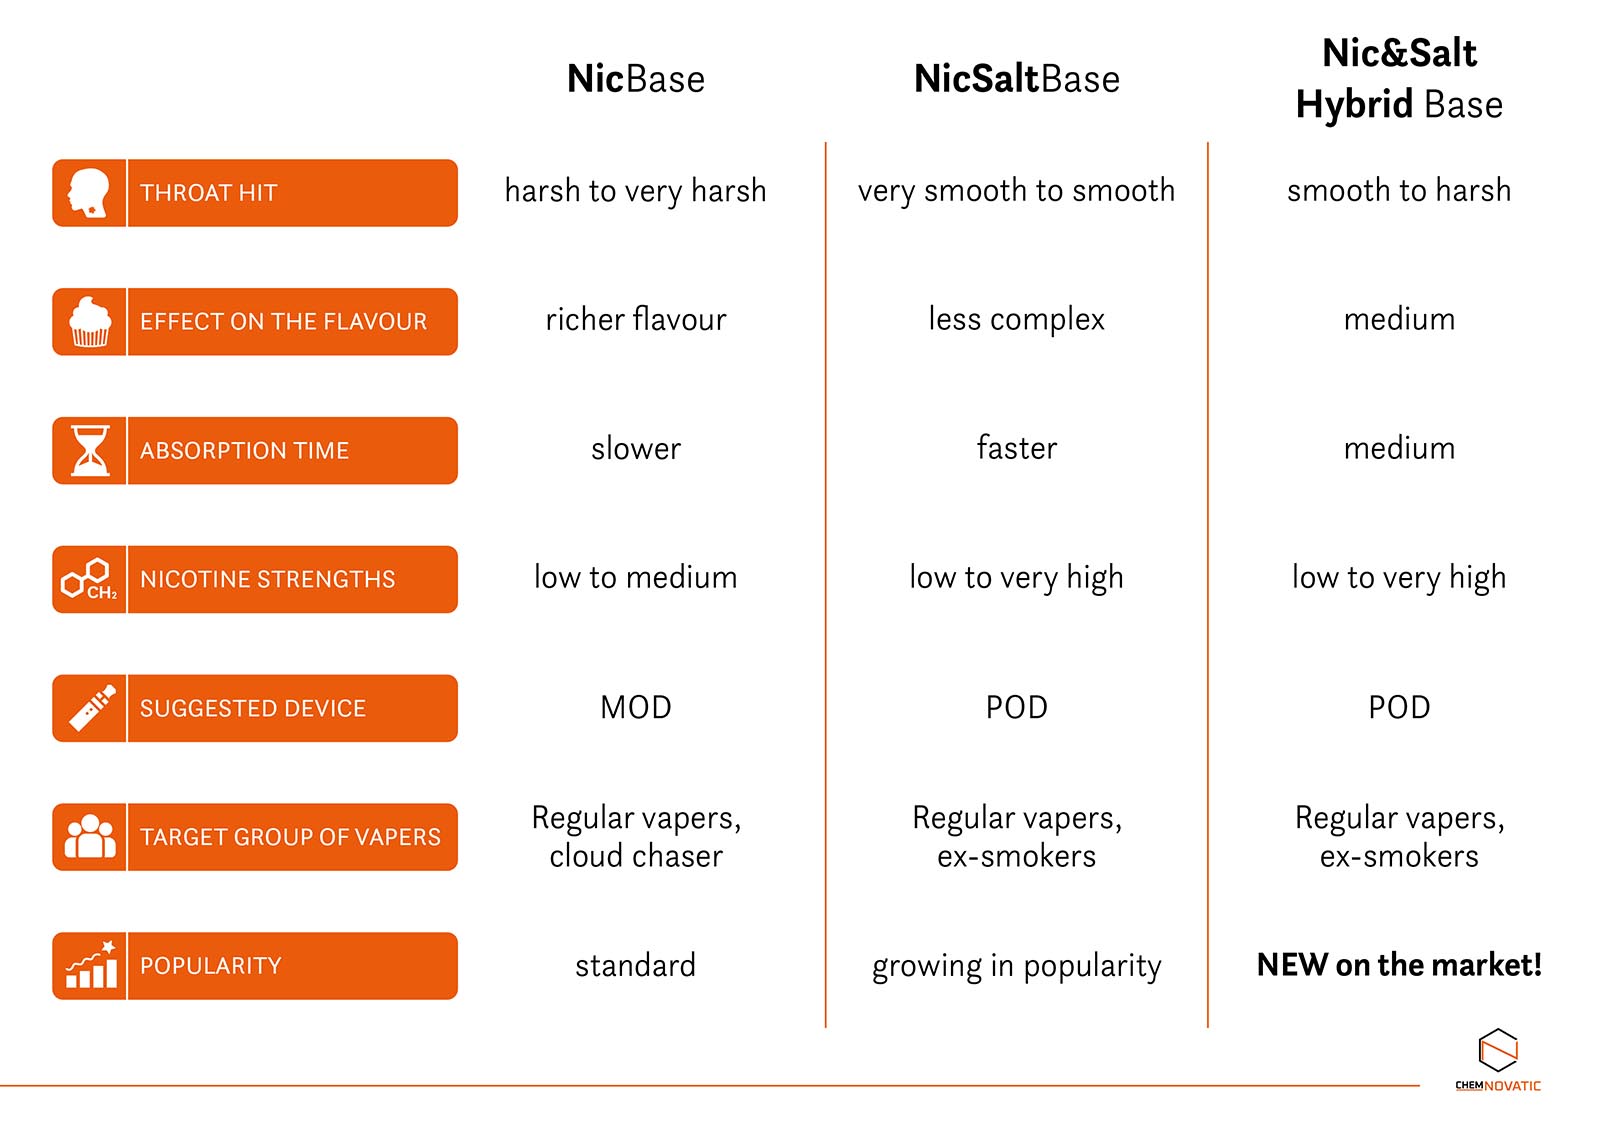 a table comparison of: nicbase, nicsalt base and nic&salt hybrid base when it comes to: throat hit, effect on the flavour, absorption, nicotine strengths, suggested devices, target group of vapers and populartiy